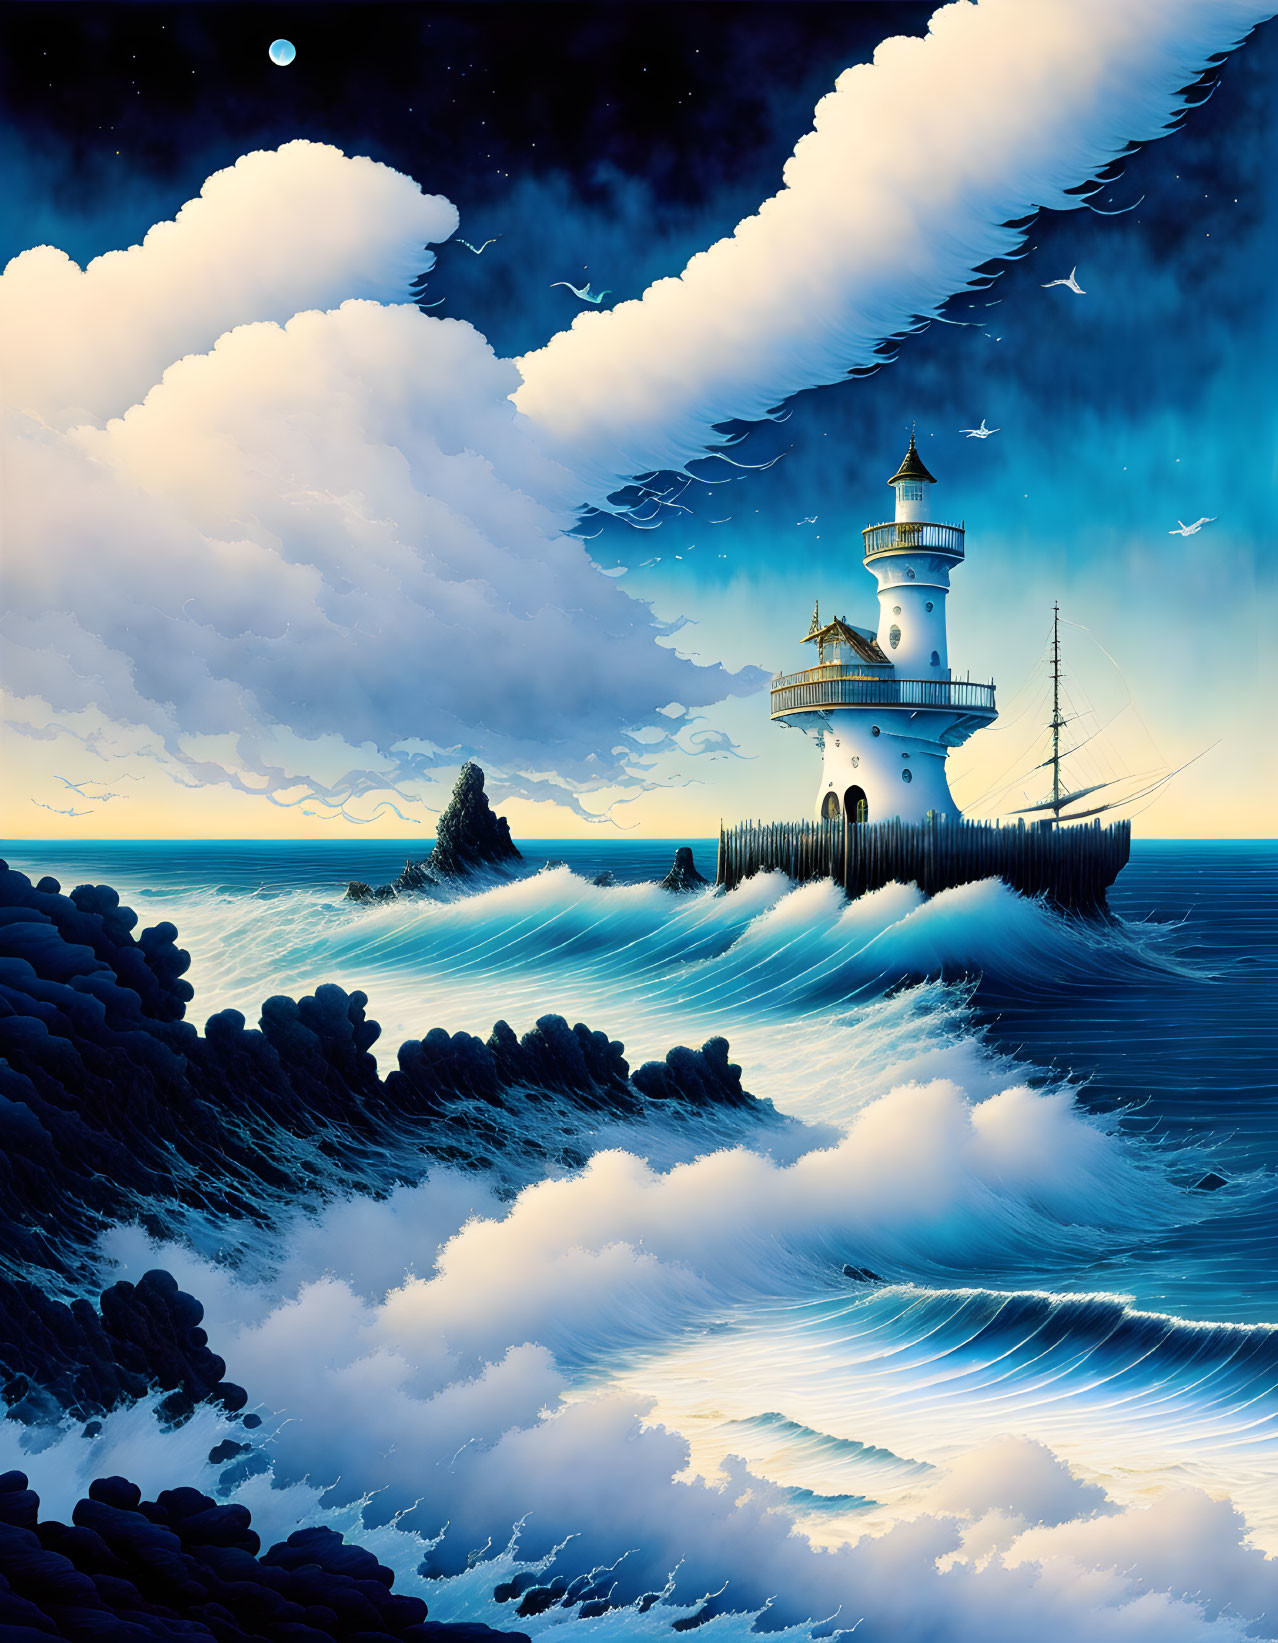 Moonlit seascape with lighthouse, ship, and birds